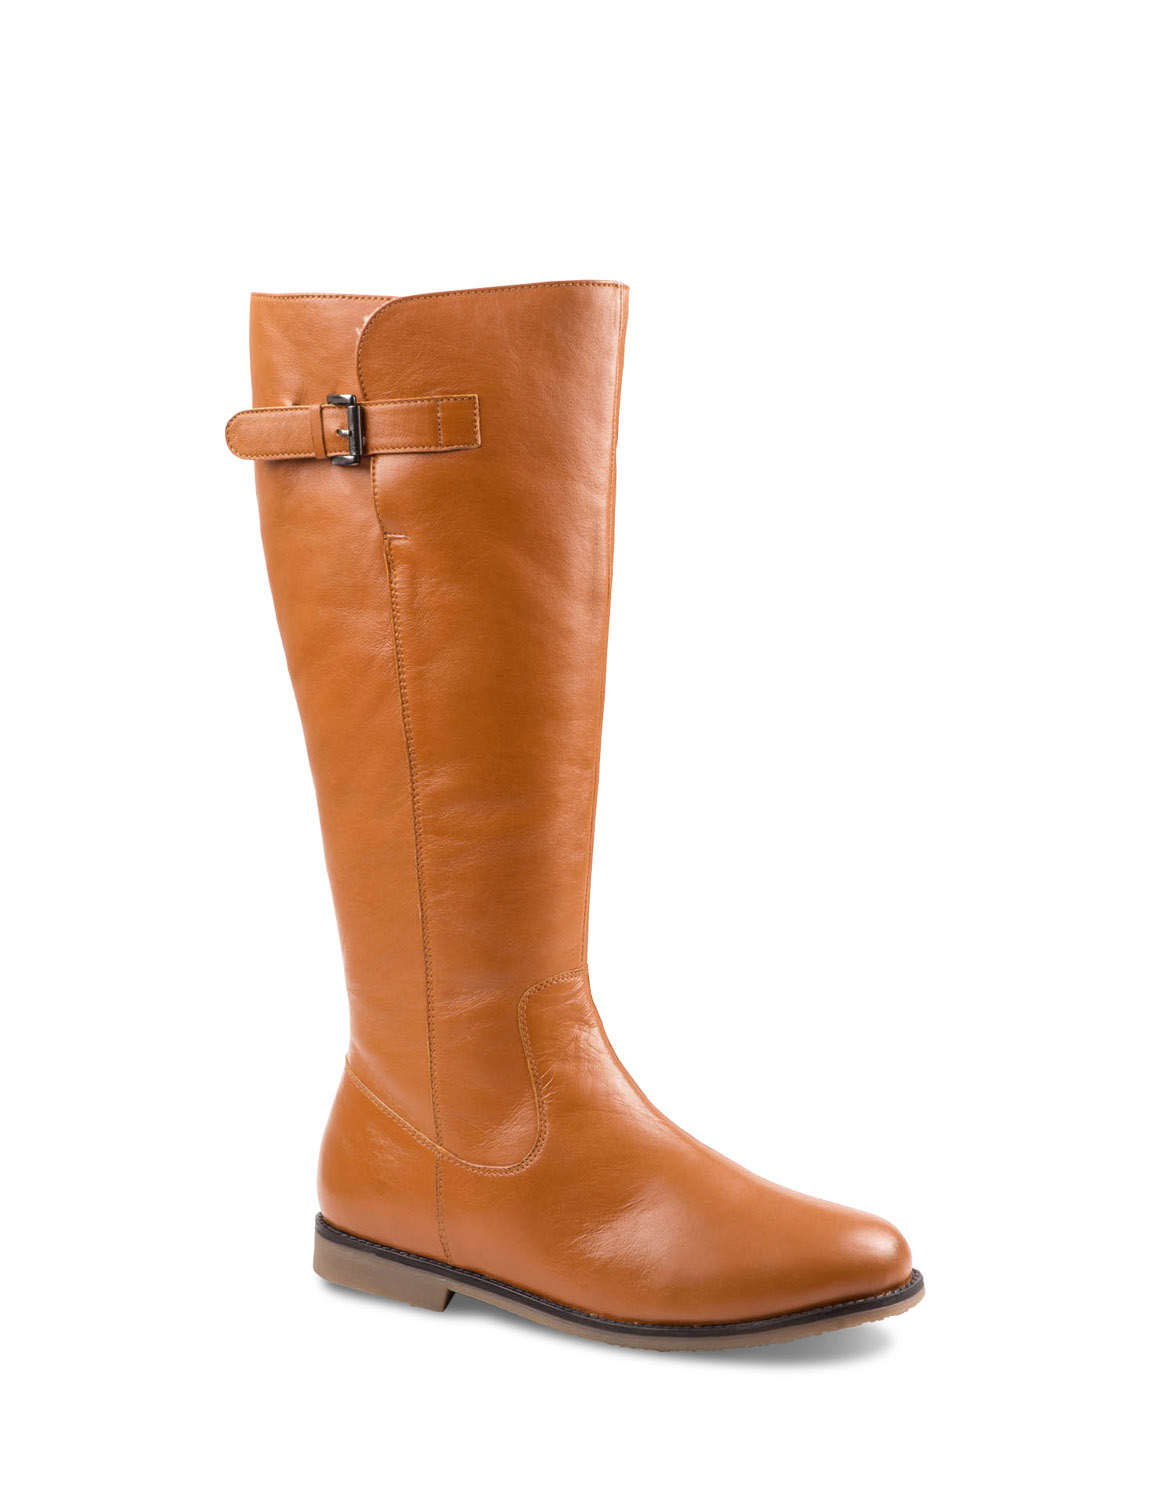 Chums leather boots thermal lined | eBay